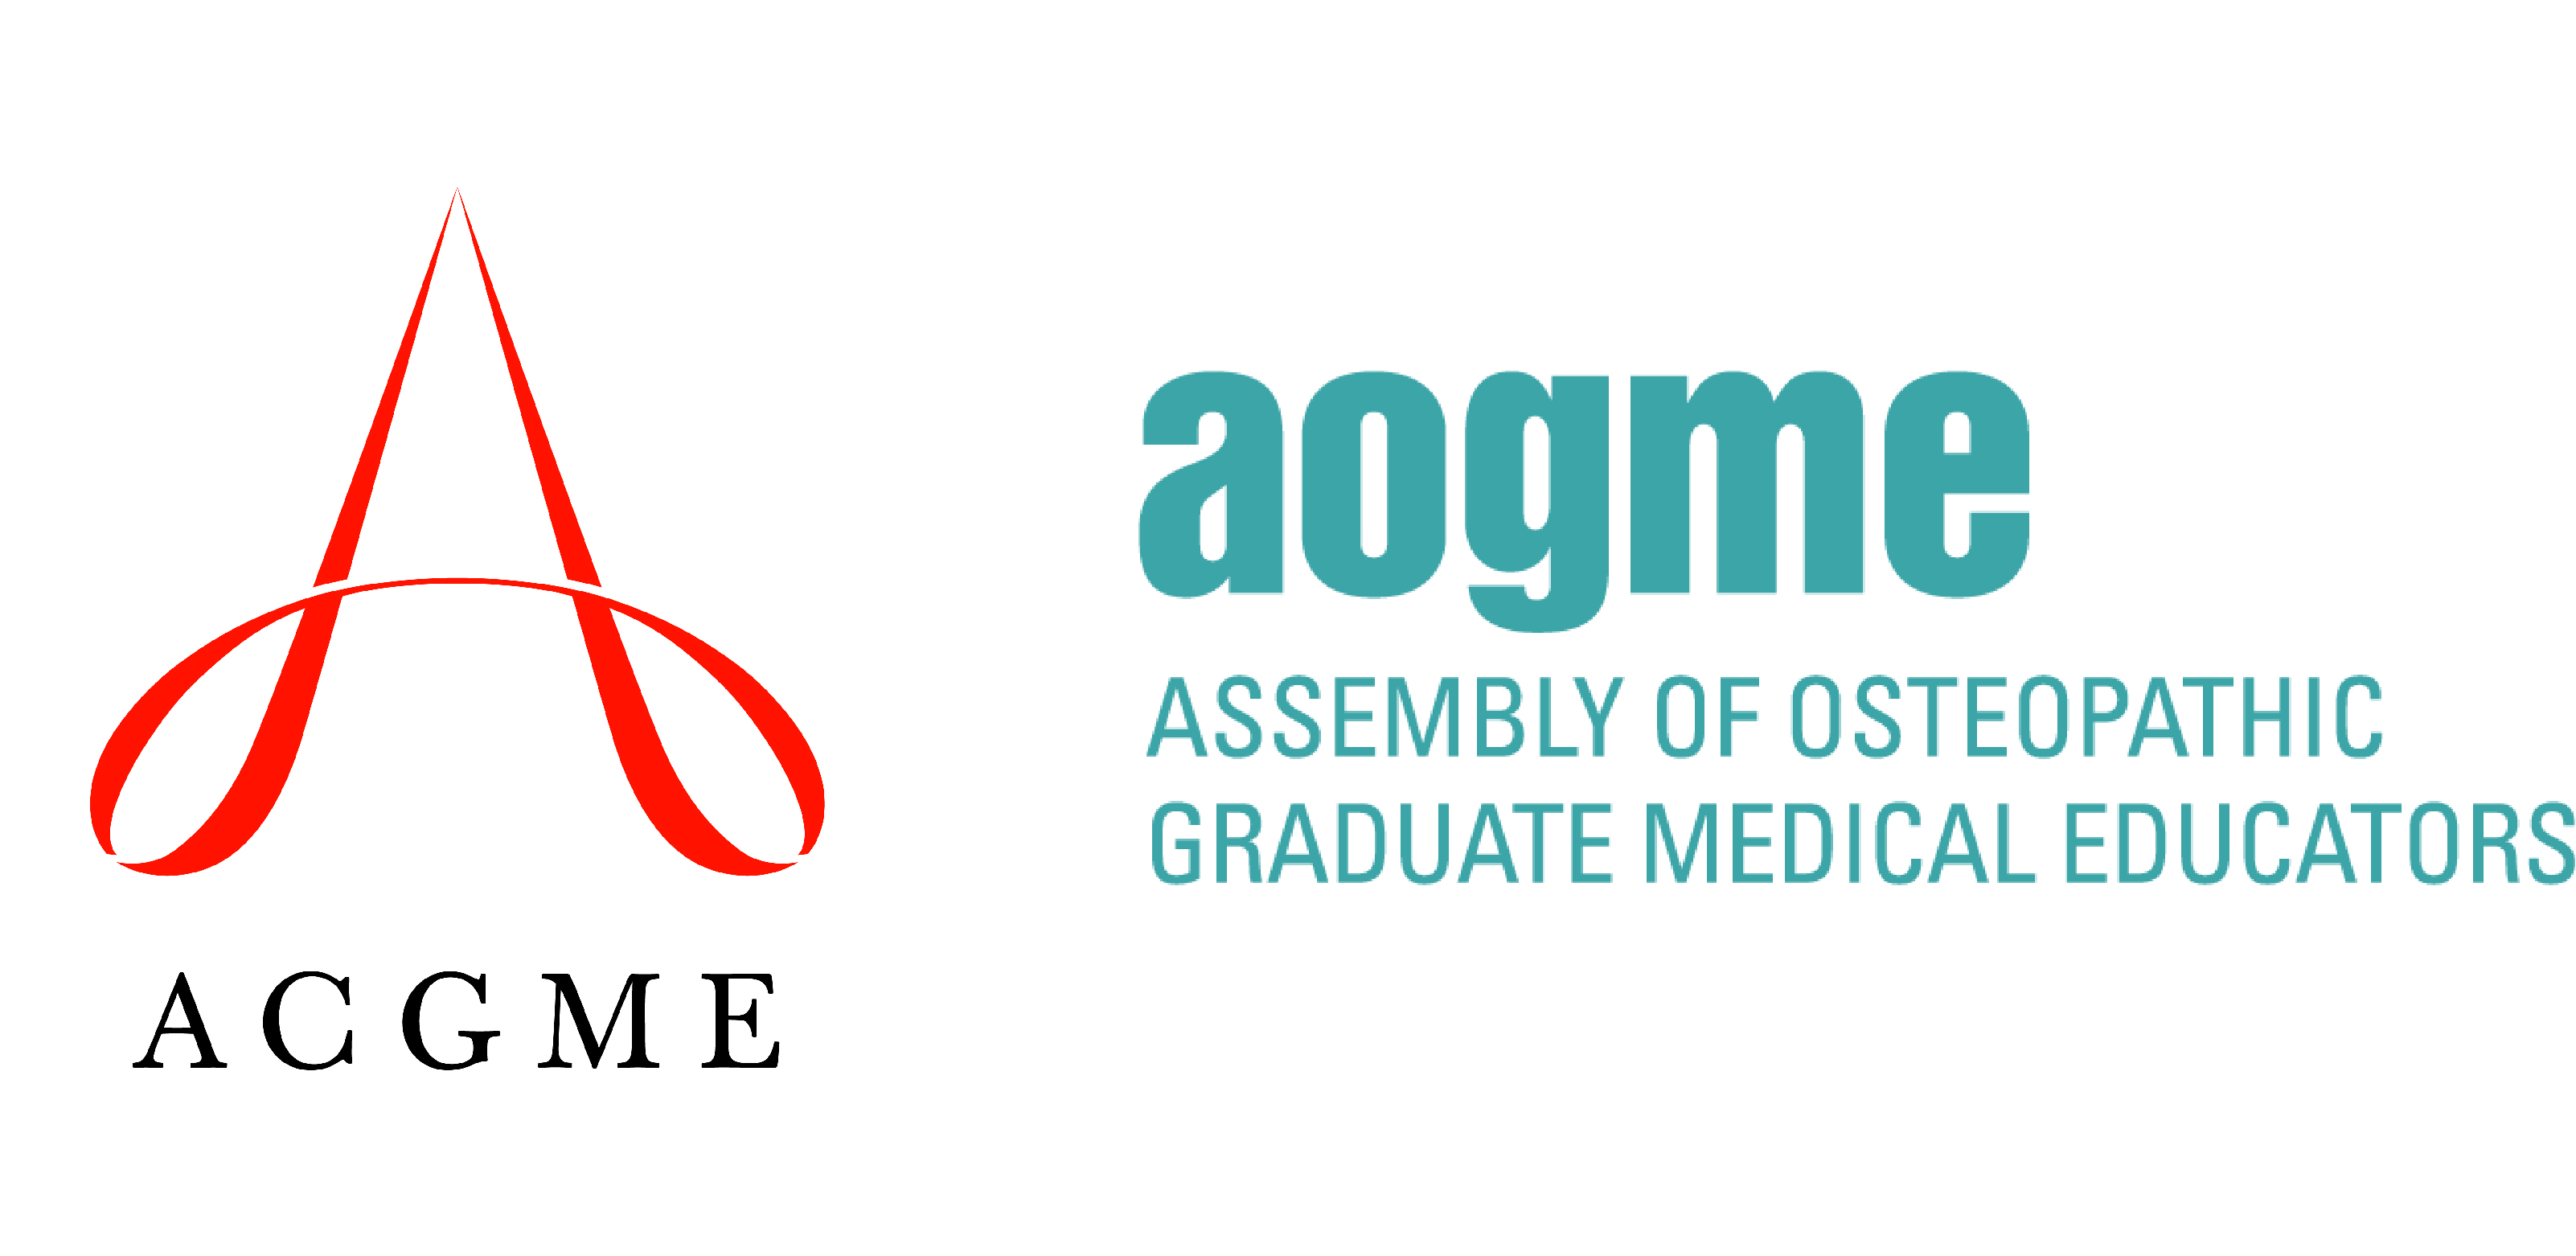 The ACGME is pleased once again to partner with the AOGME for the ACGME/AOGME Osteopathic Recognition Pre-Conference.